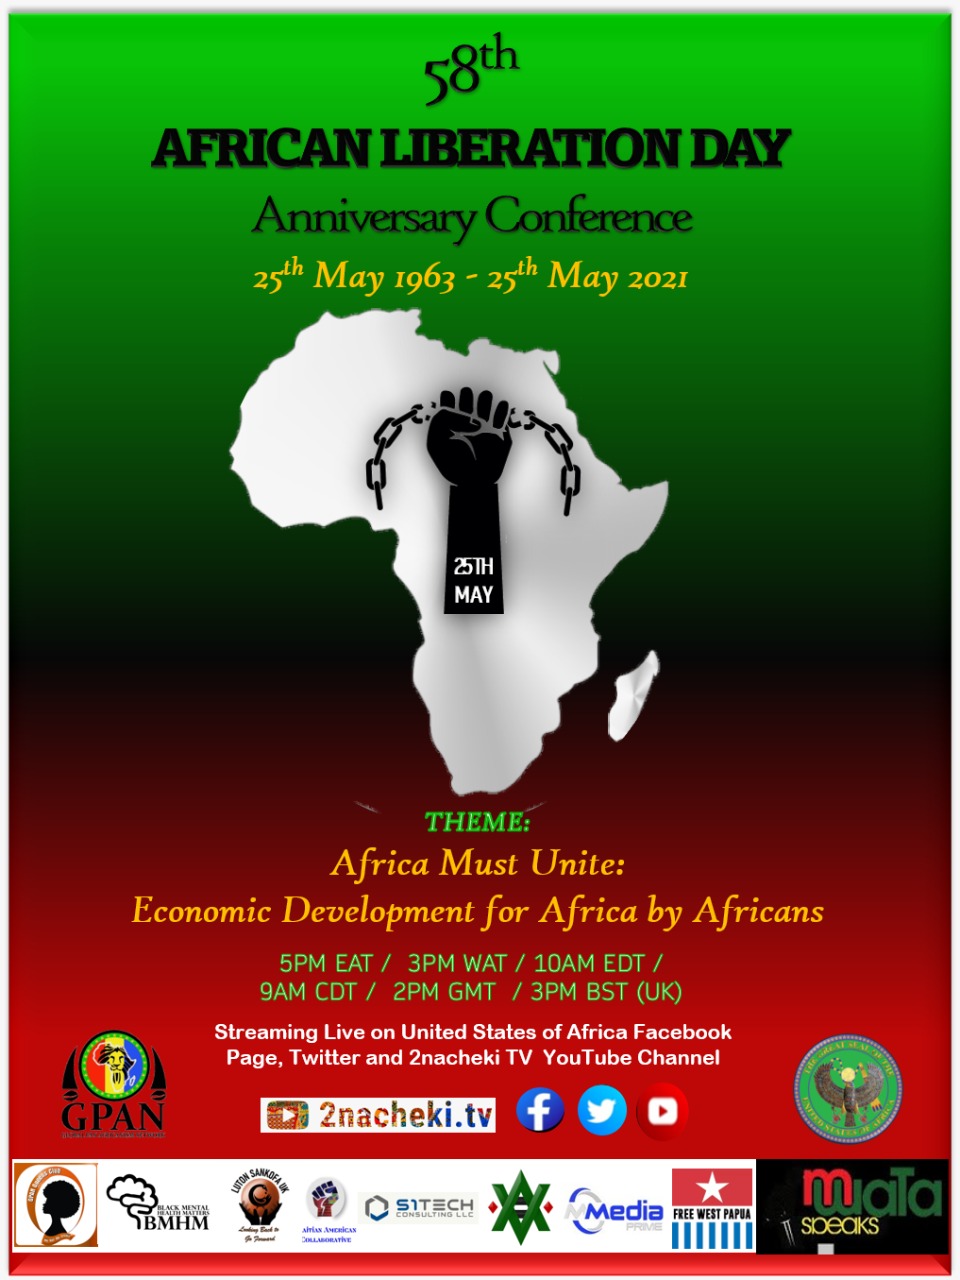 58th African Liberation Day Anniversary Conference